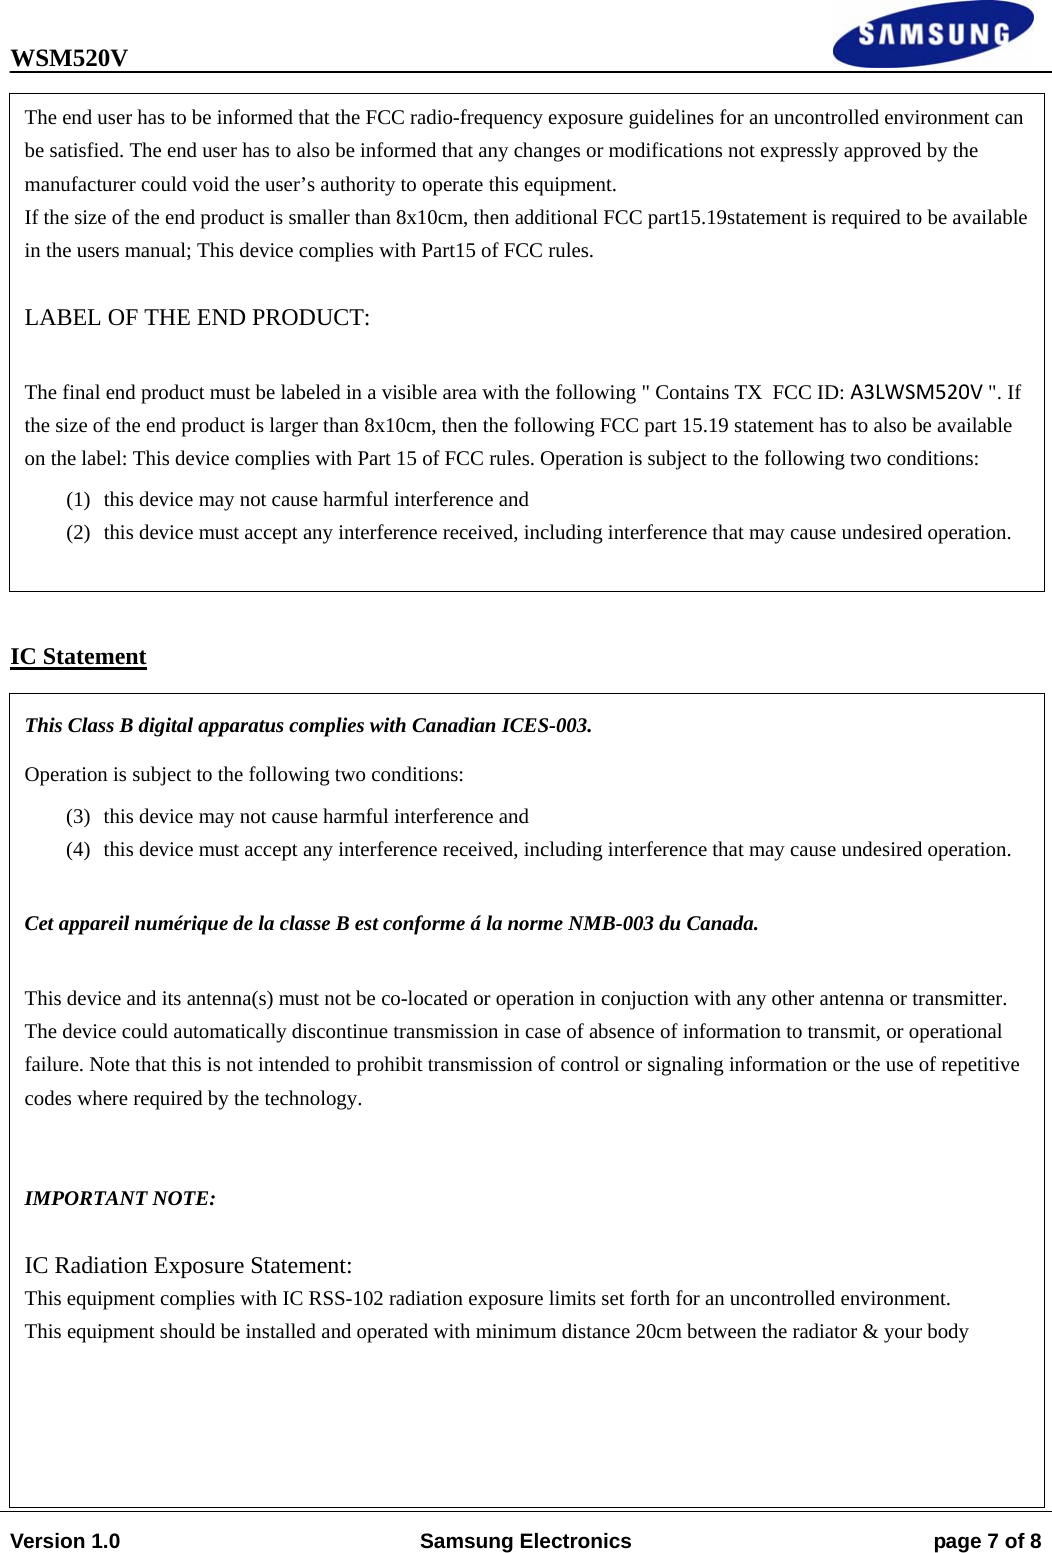 WSM520V                                                                                                                                Version 1.0  Samsung Electronics  page 7 of 8                    IC Statement   The end user has to be informed that the FCC radio-frequency exposure guidelines for an uncontrolled environment can be satisfied. The end user has to also be informed that any changes or modifications not expressly approved by the manufacturer could void the user’s authority to operate this equipment. If the size of the end product is smaller than 8x10cm, then additional FCC part15.19statement is required to be available in the users manual; This device complies with Part15 of FCC rules.   LABEL OF THE END PRODUCT:   The final end product must be labeled in a visible area with the following &quot; Contains TX  FCC ID: A3LWSM520V &quot;. If the size of the end product is larger than 8x10cm, then the following FCC part 15.19 statement has to also be available on the label: This device complies with Part 15 of FCC rules. Operation is subject to the following two conditions:  (1) this device may not cause harmful interference and  (2) this device must accept any interference received, including interference that may cause undesired operation.  This Class B digital apparatus complies with Canadian ICES-003. Operation is subject to the following two conditions:  (3) this device may not cause harmful interference and  (4) this device must accept any interference received, including interference that may cause undesired operation.  Cet appareil numérique de la classe B est conforme á la norme NMB-003 du Canada.   This device and its antenna(s) must not be co-located or operation in conjuction with any other antenna or transmitter. The device could automatically discontinue transmission in case of absence of information to transmit, or operational failure. Note that this is not intended to prohibit transmission of control or signaling information or the use of repetitive codes where required by the technology.    IMPORTANT NOTE:   IC Radiation Exposure Statement:  This equipment complies with IC RSS-102 radiation exposure limits set forth for an uncontrolled environment. This equipment should be installed and operated with minimum distance 20cm between the radiator &amp; your body 